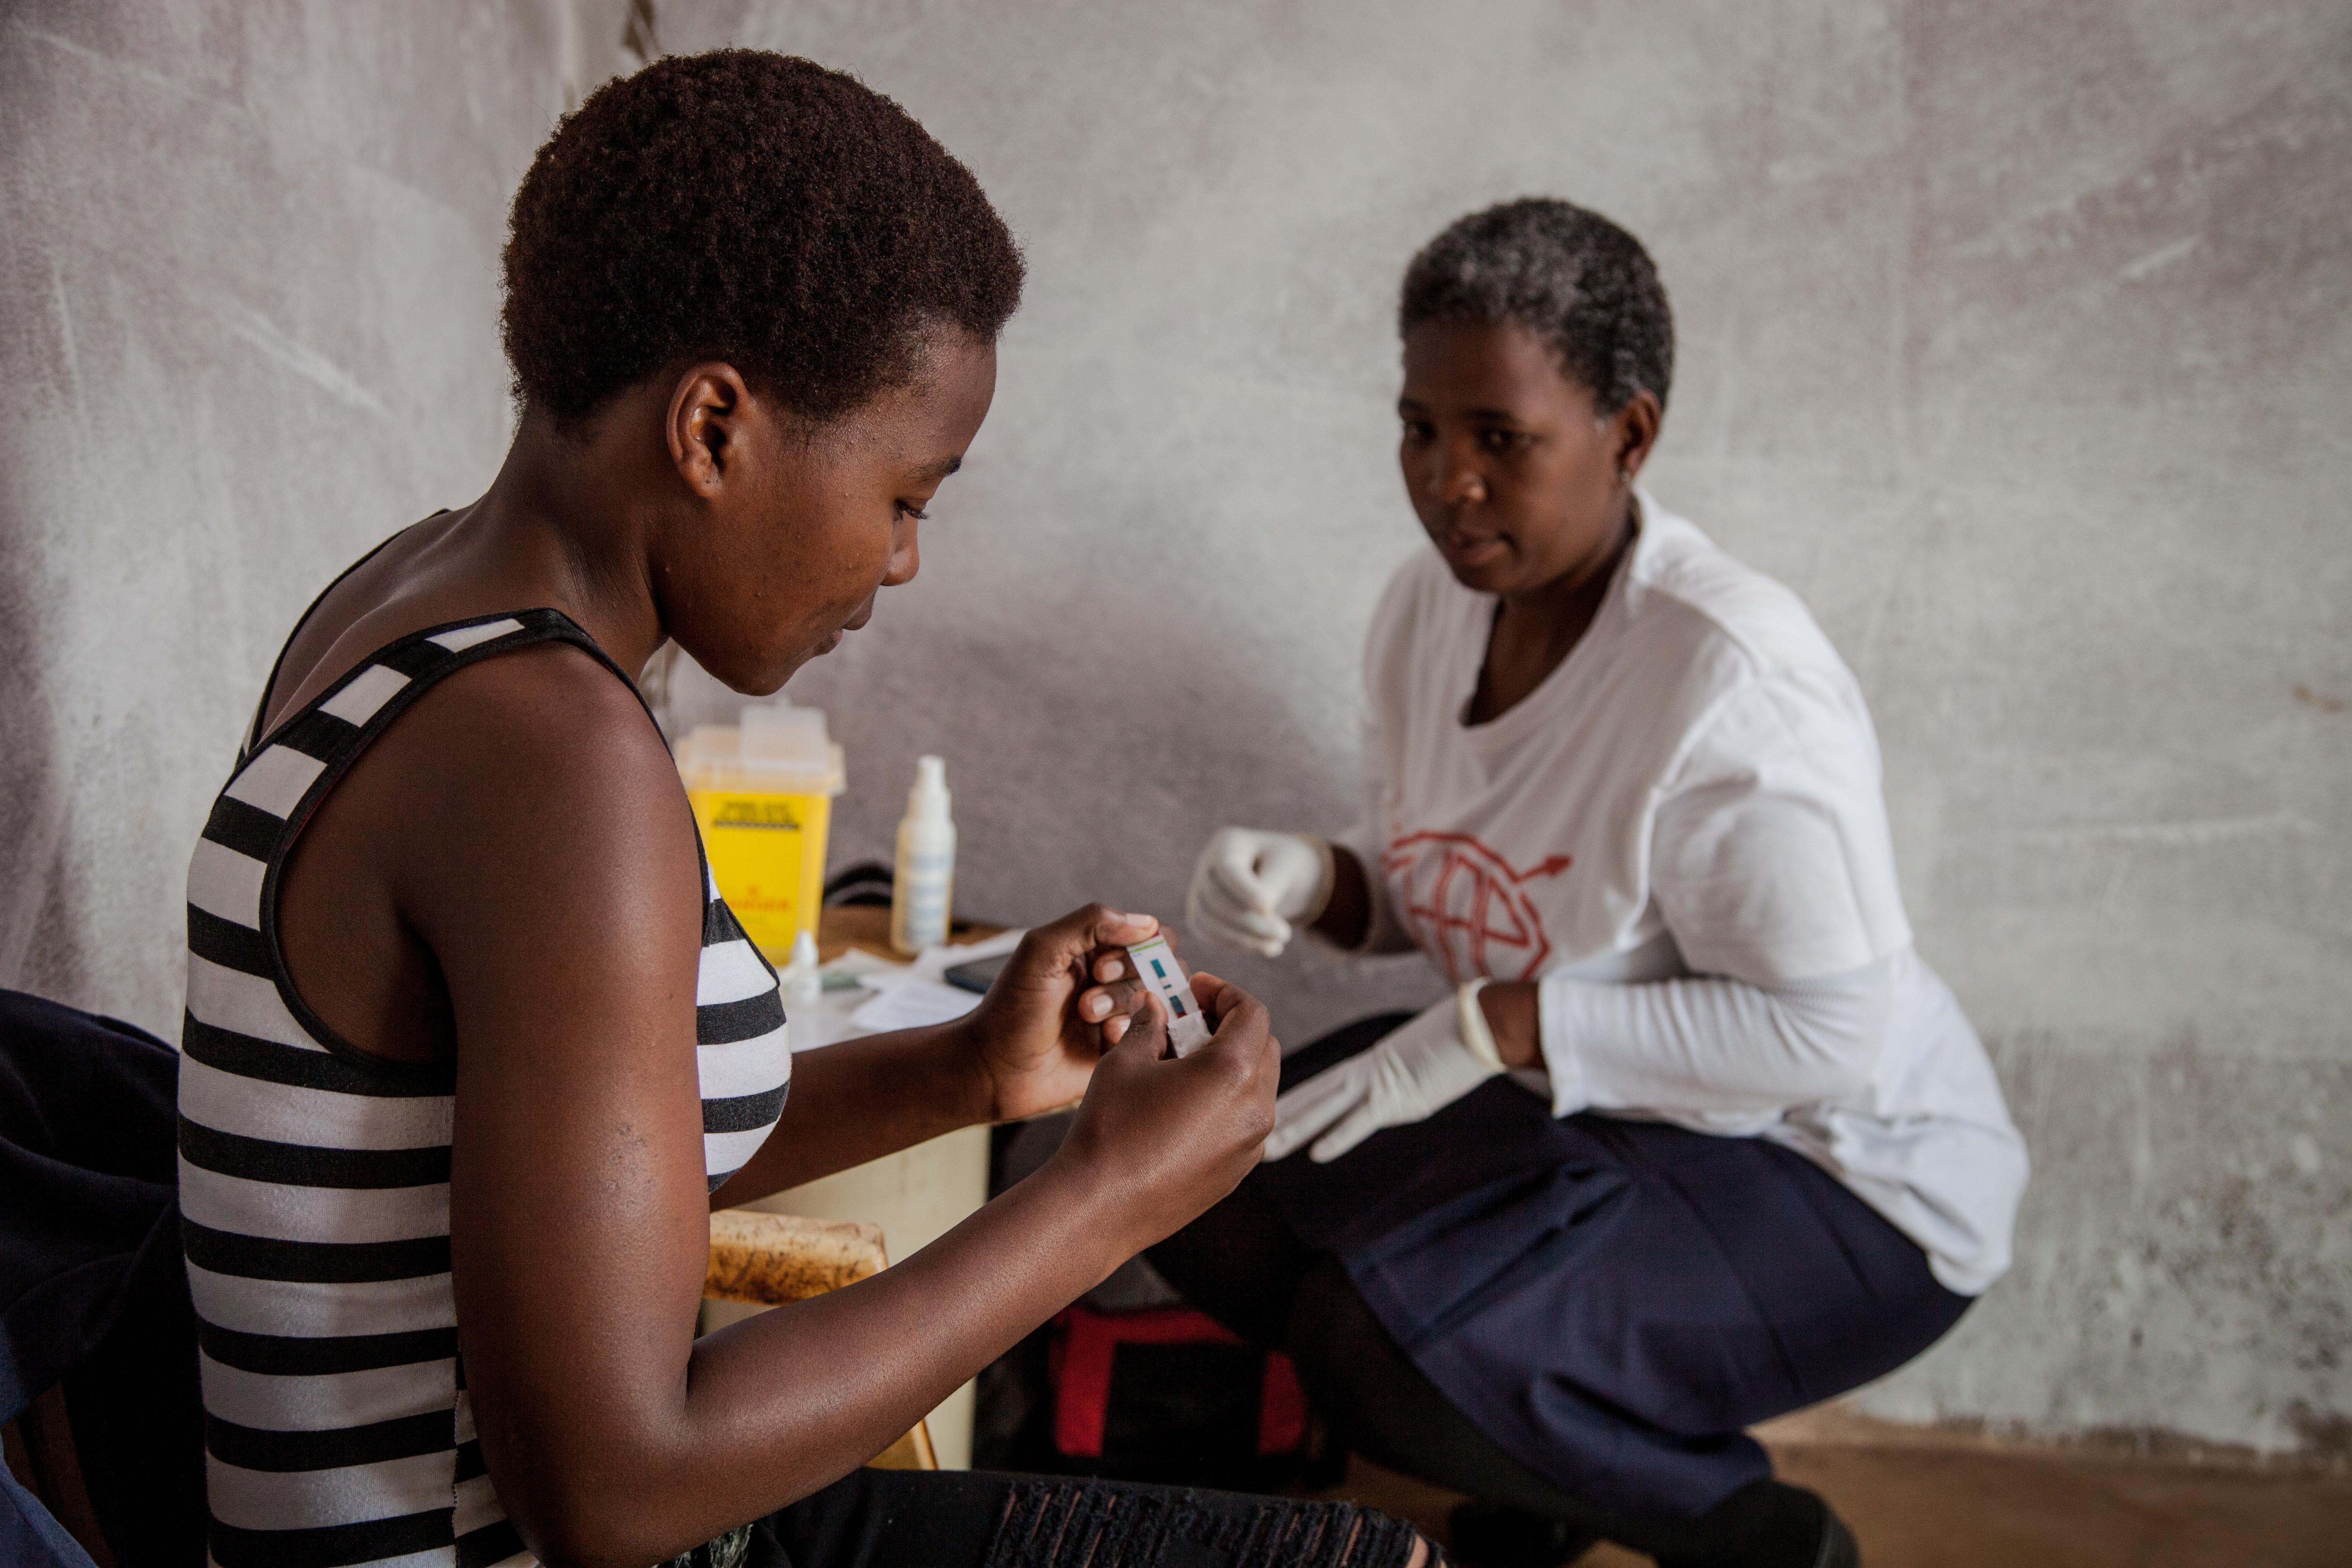 Community Health Agent Babongile Luhlongwane conducts an HIV test on Andile (28), who lives in the remote Entumeni District of KwaZulu-Natal, where HIV prevalence in South Africa is among the highest. 